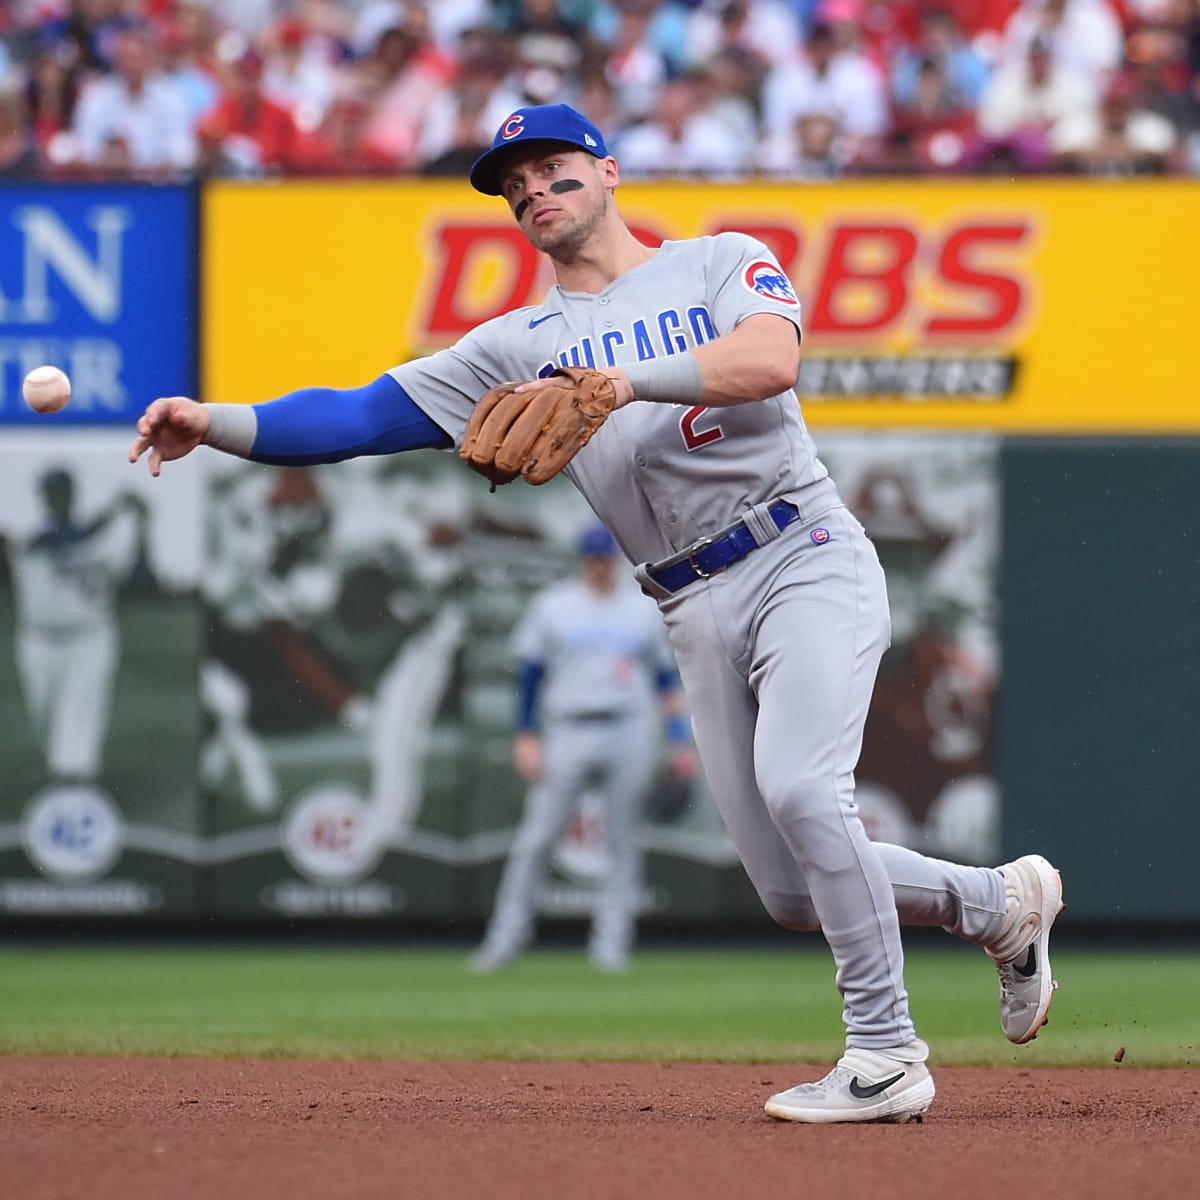 Nico Hoerner powers Cubs to rout, second sweep of Pirates